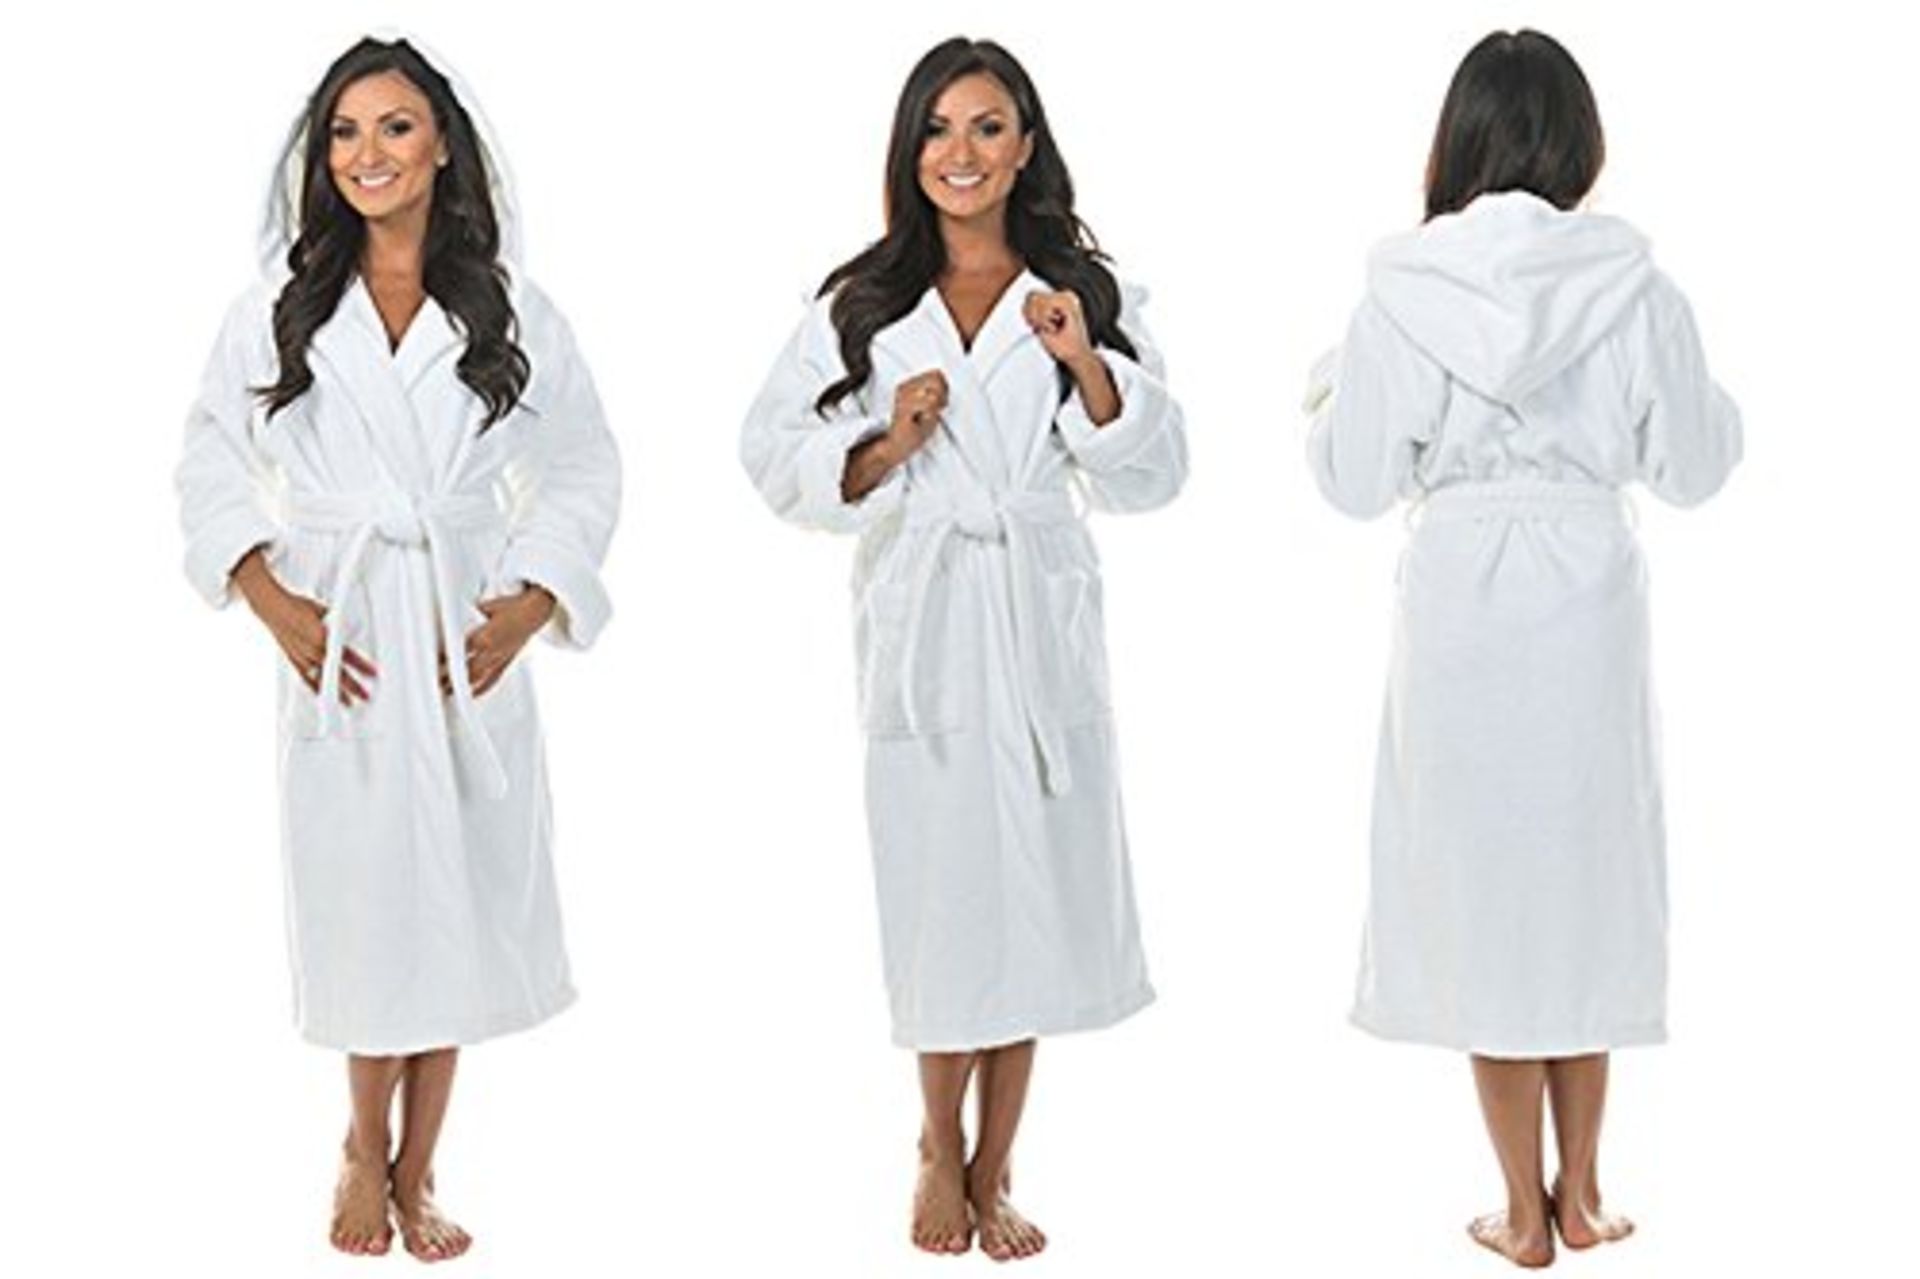 V Brand New Frette Luxury Italian 100% Open Ended High Quality Cotton White Bath Robe with Hood